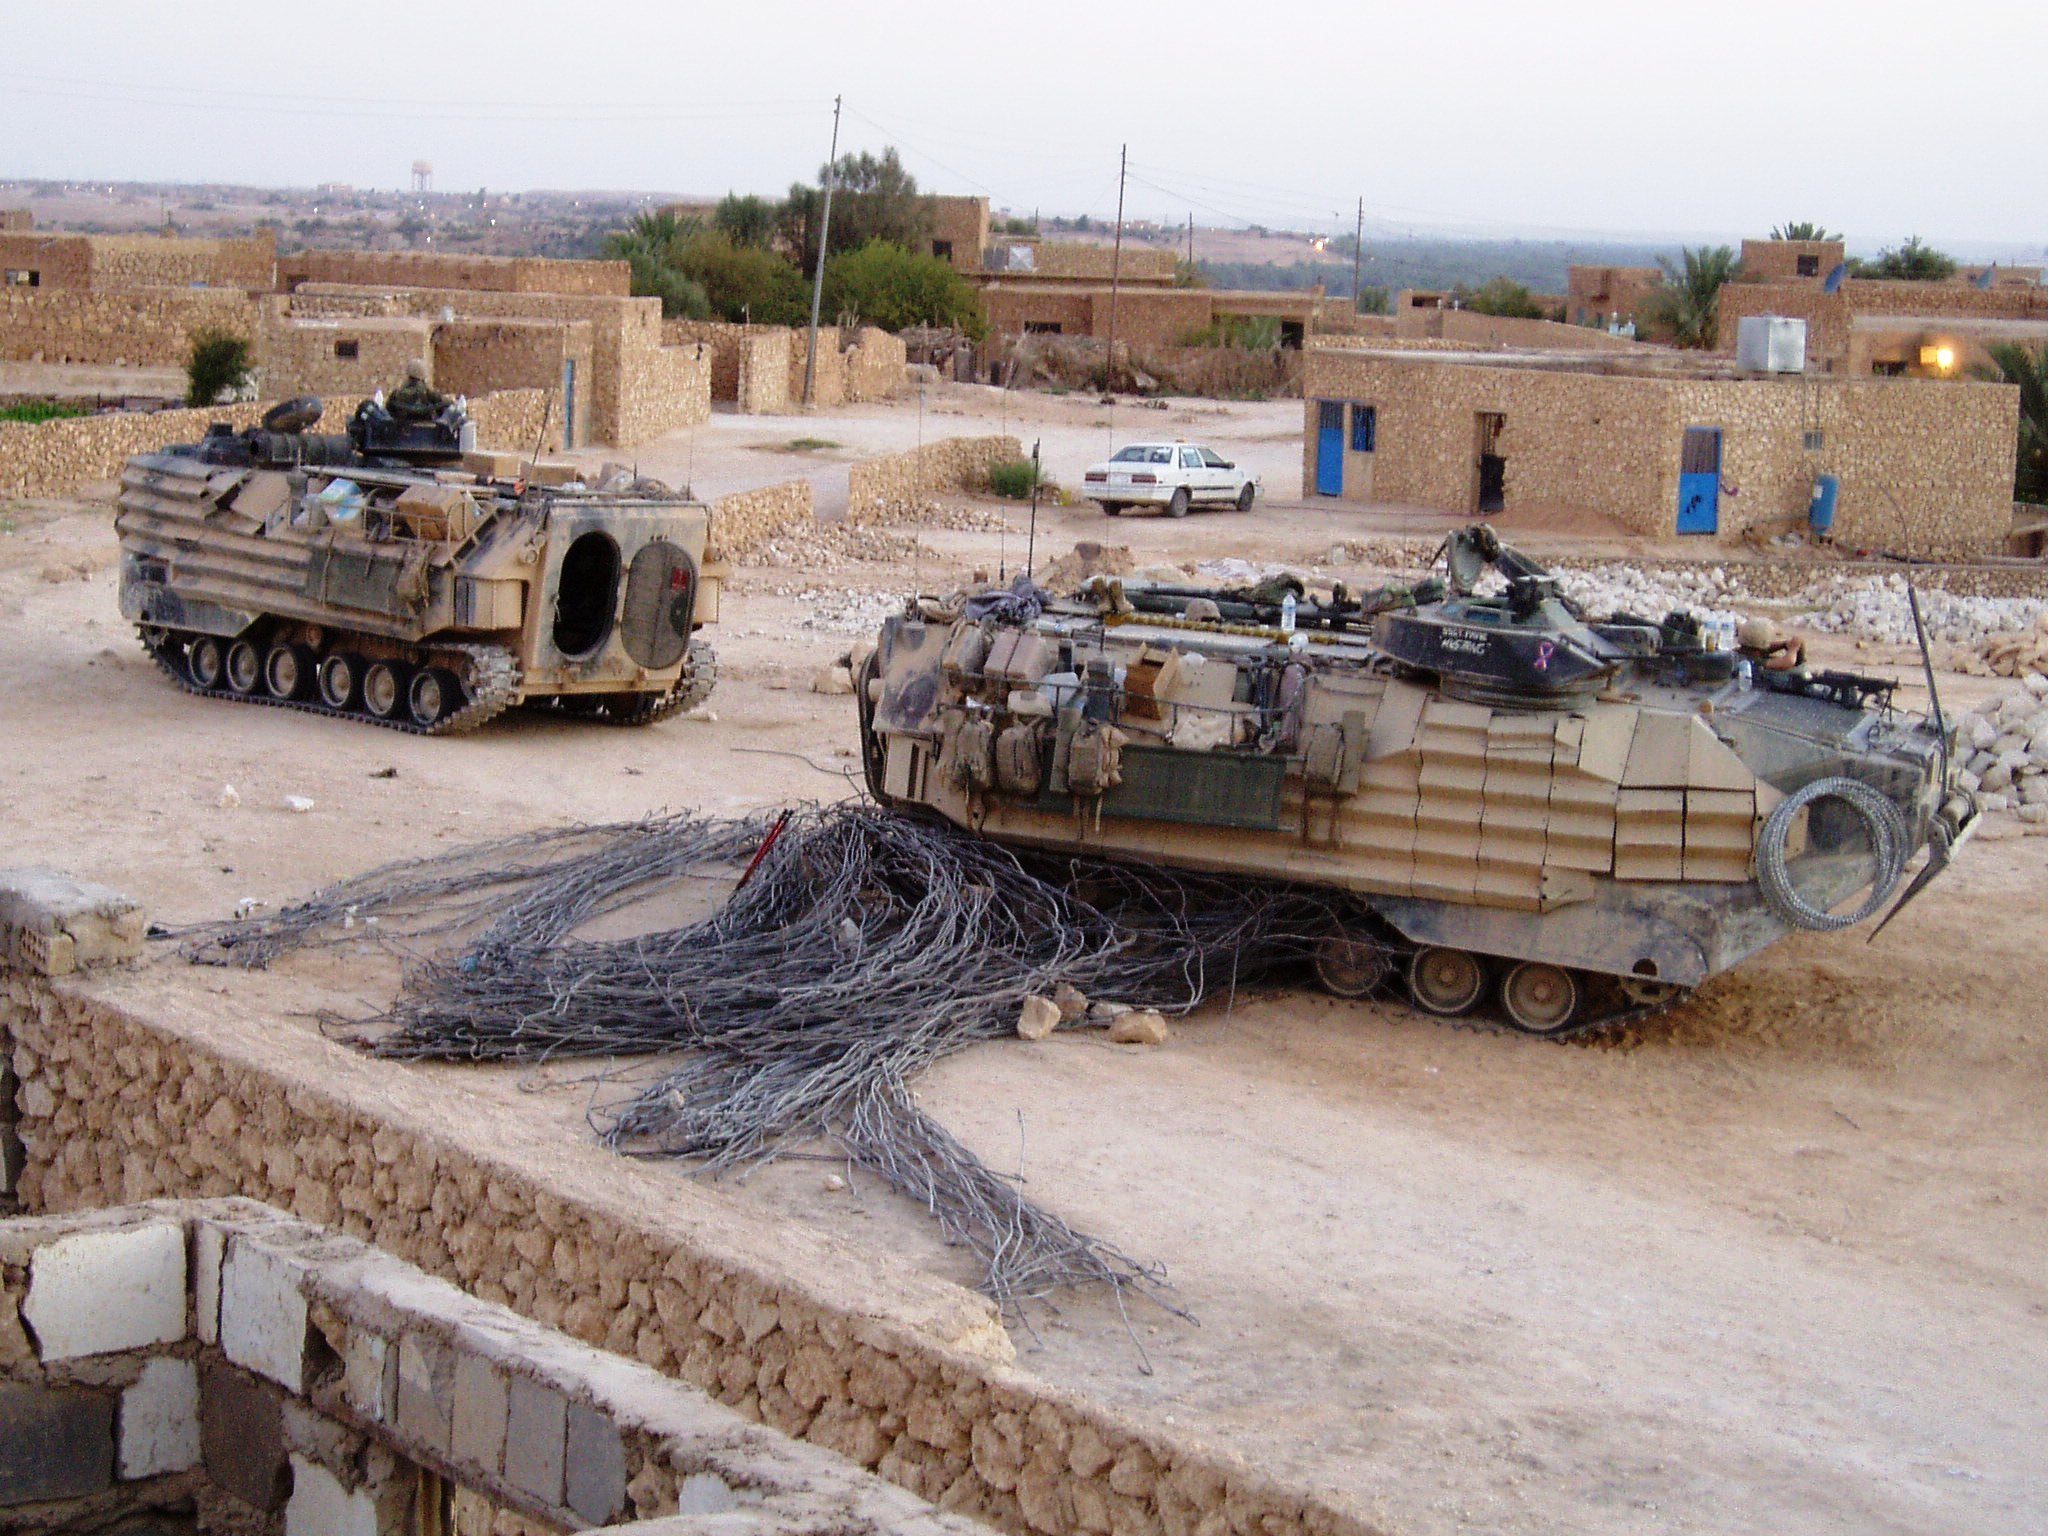 two army tanks parked in a dirt area